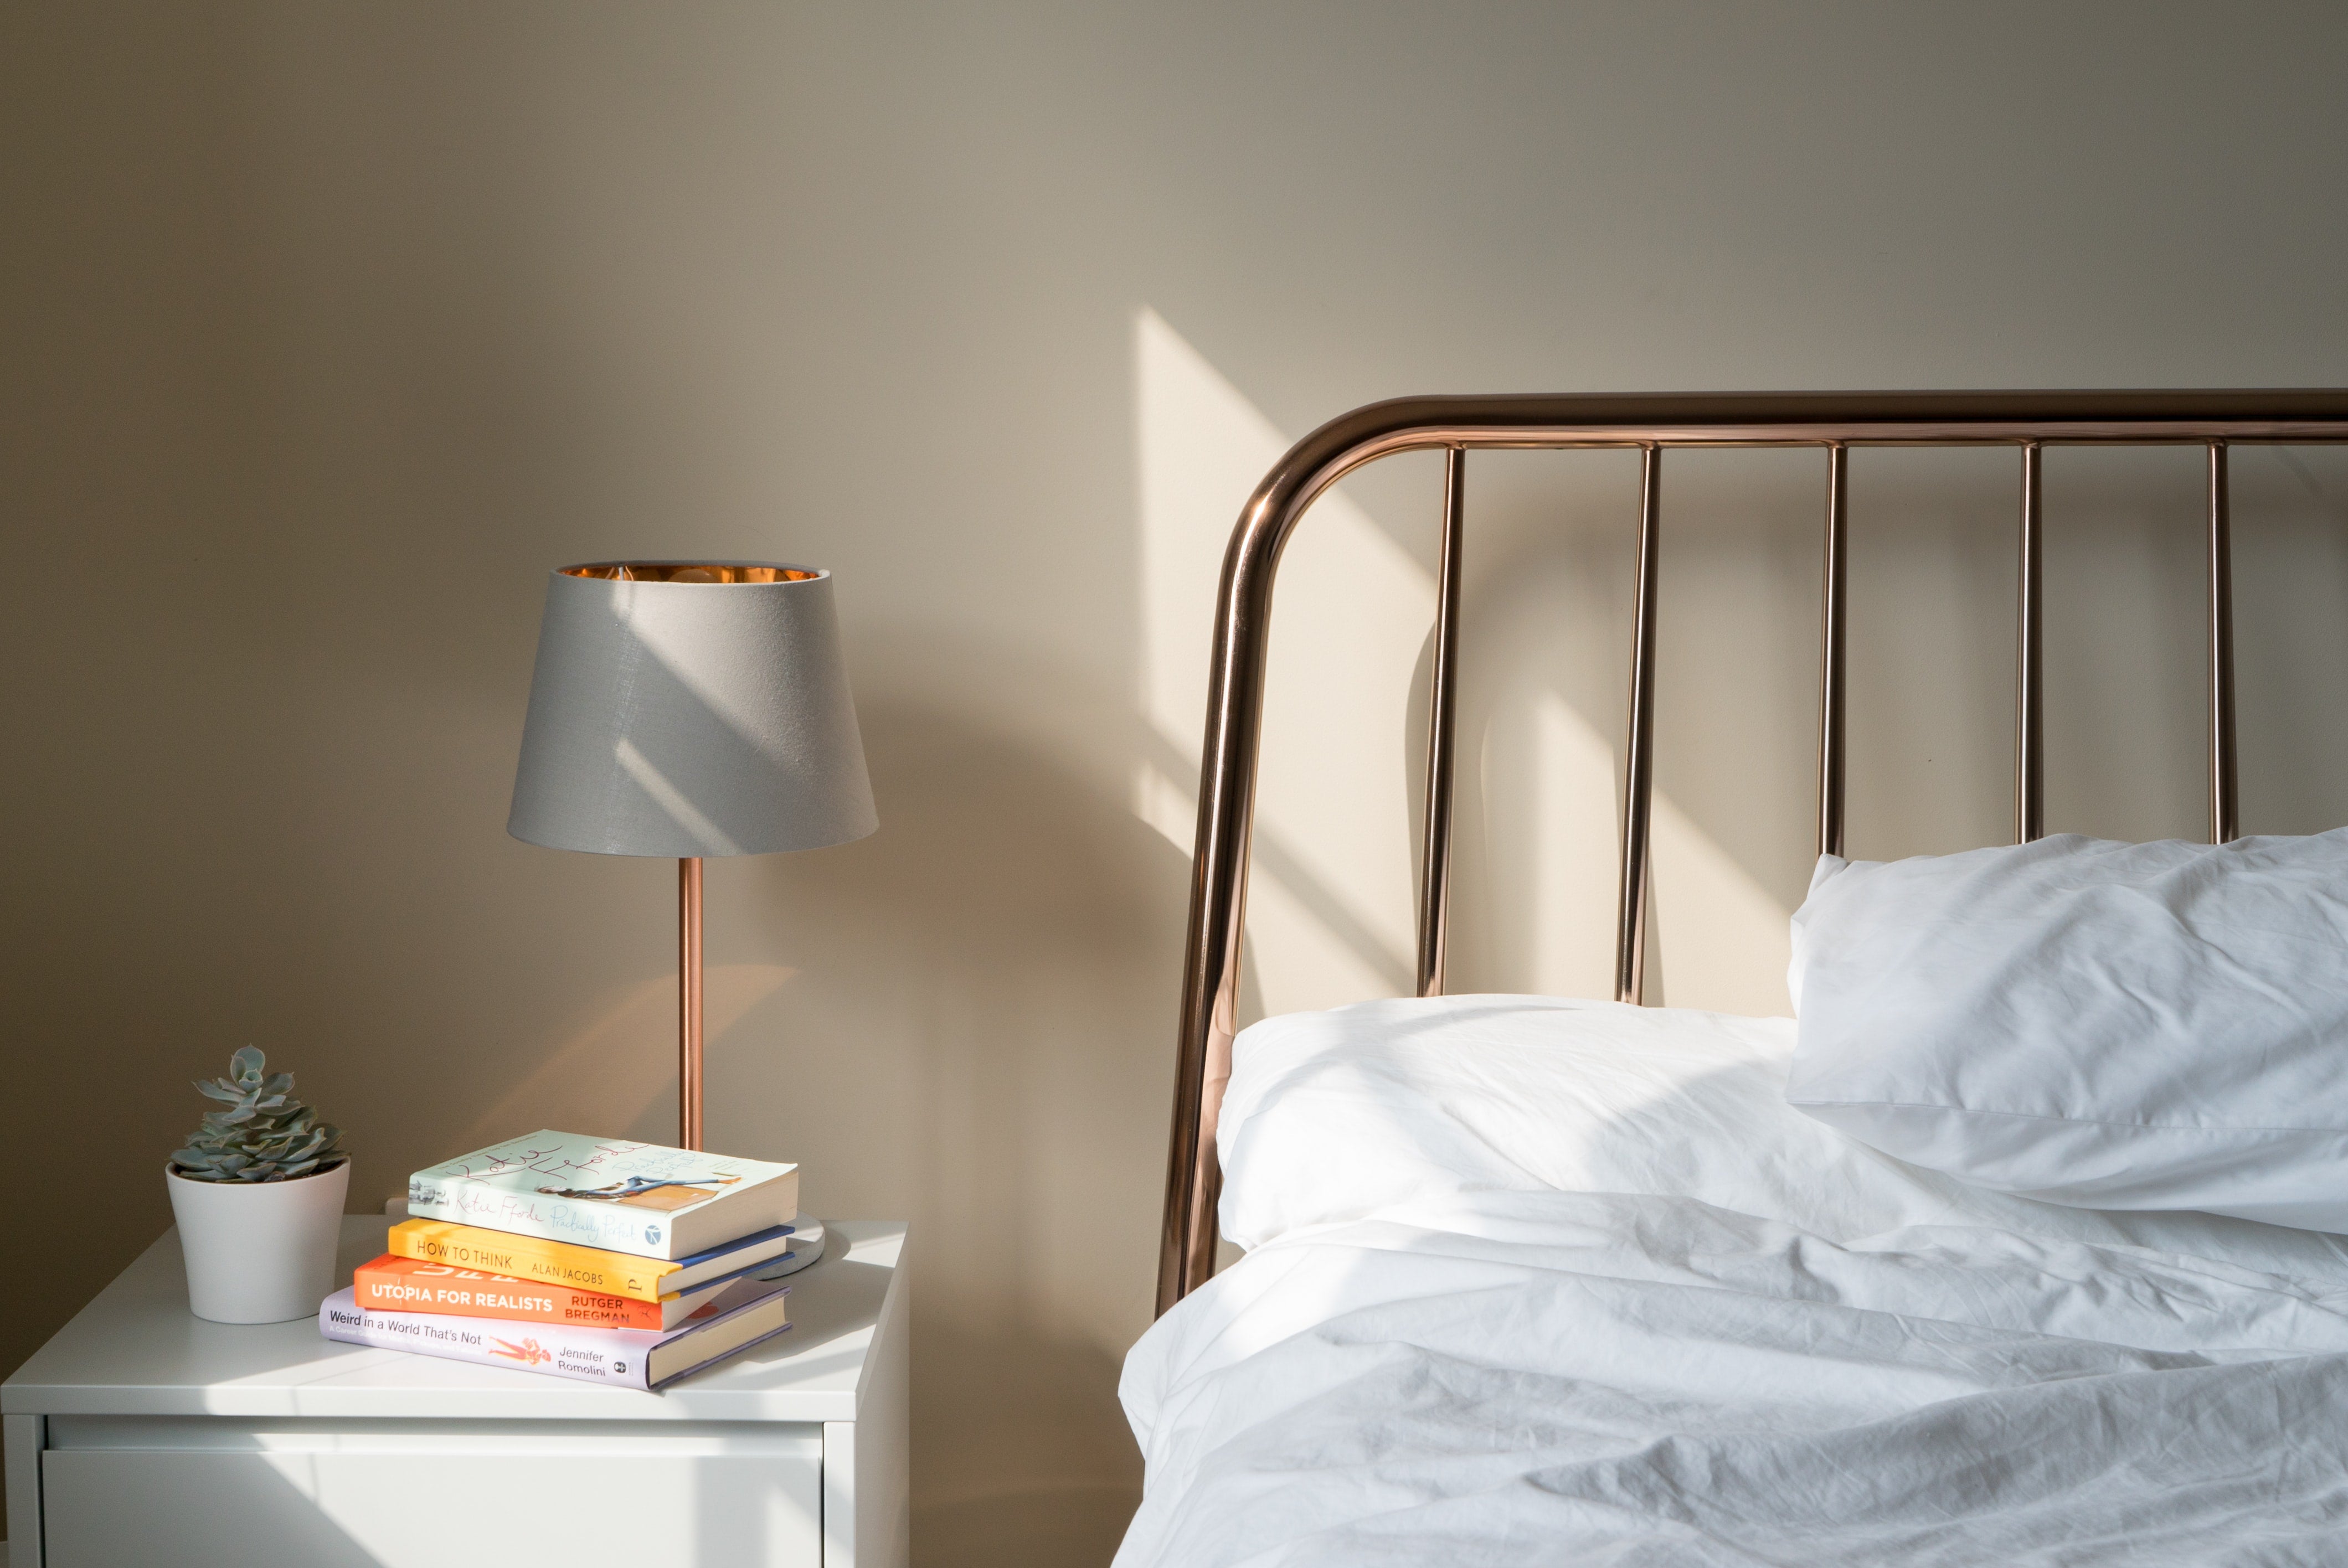 5 ways to revamp your bedroom for a better night's sleep